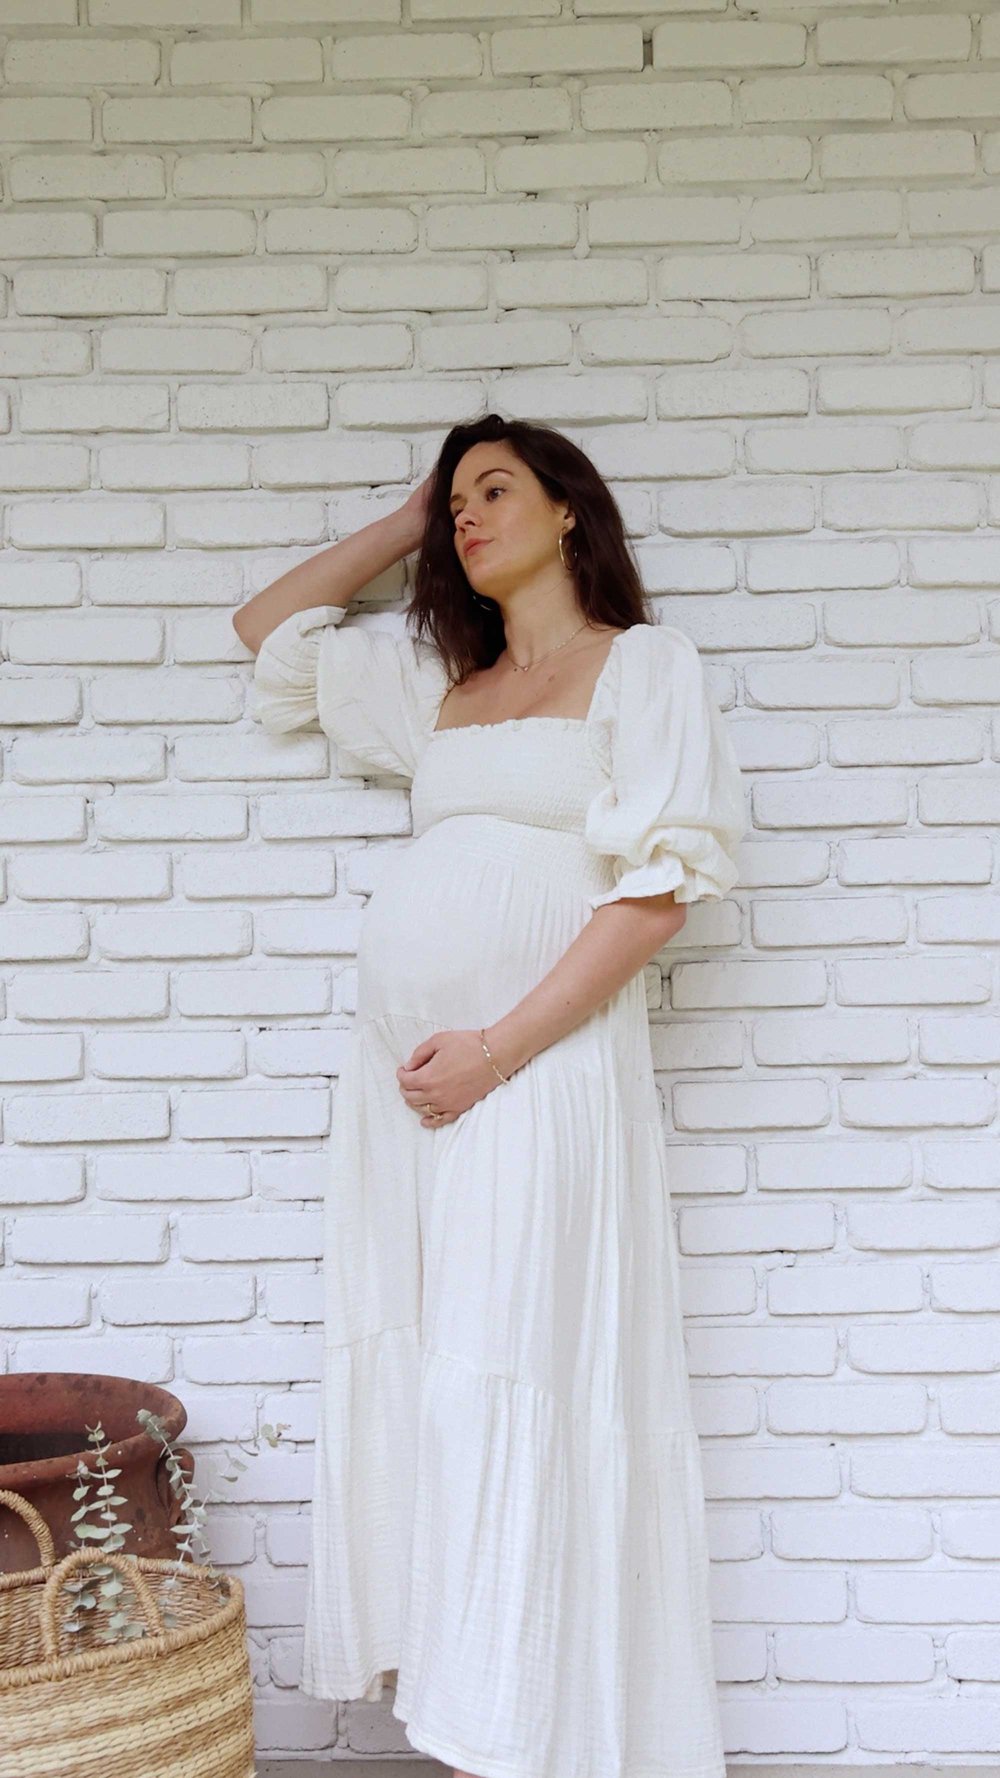 Cute cottage style summer maternity dress. @sarahchristine wearing Nothing Fits But Kiko Dress Soft muslin dress with puffed sleeves, smocked chest and sleeves in Seattle, Washington -6.jpg